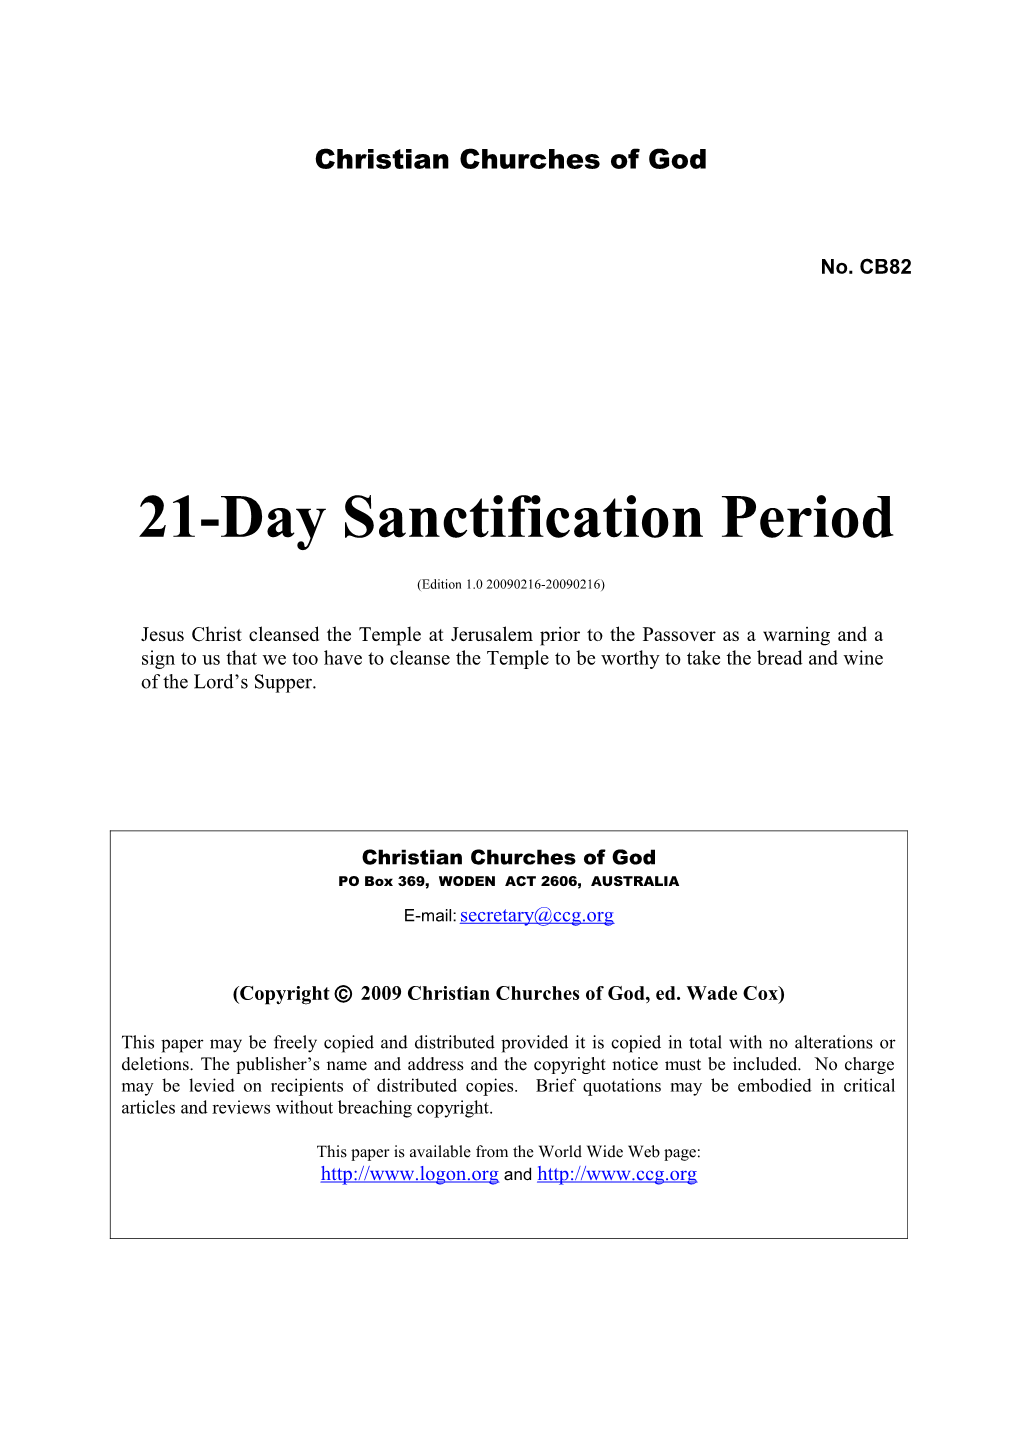 21-Day Sanctification Period (No. CB82)